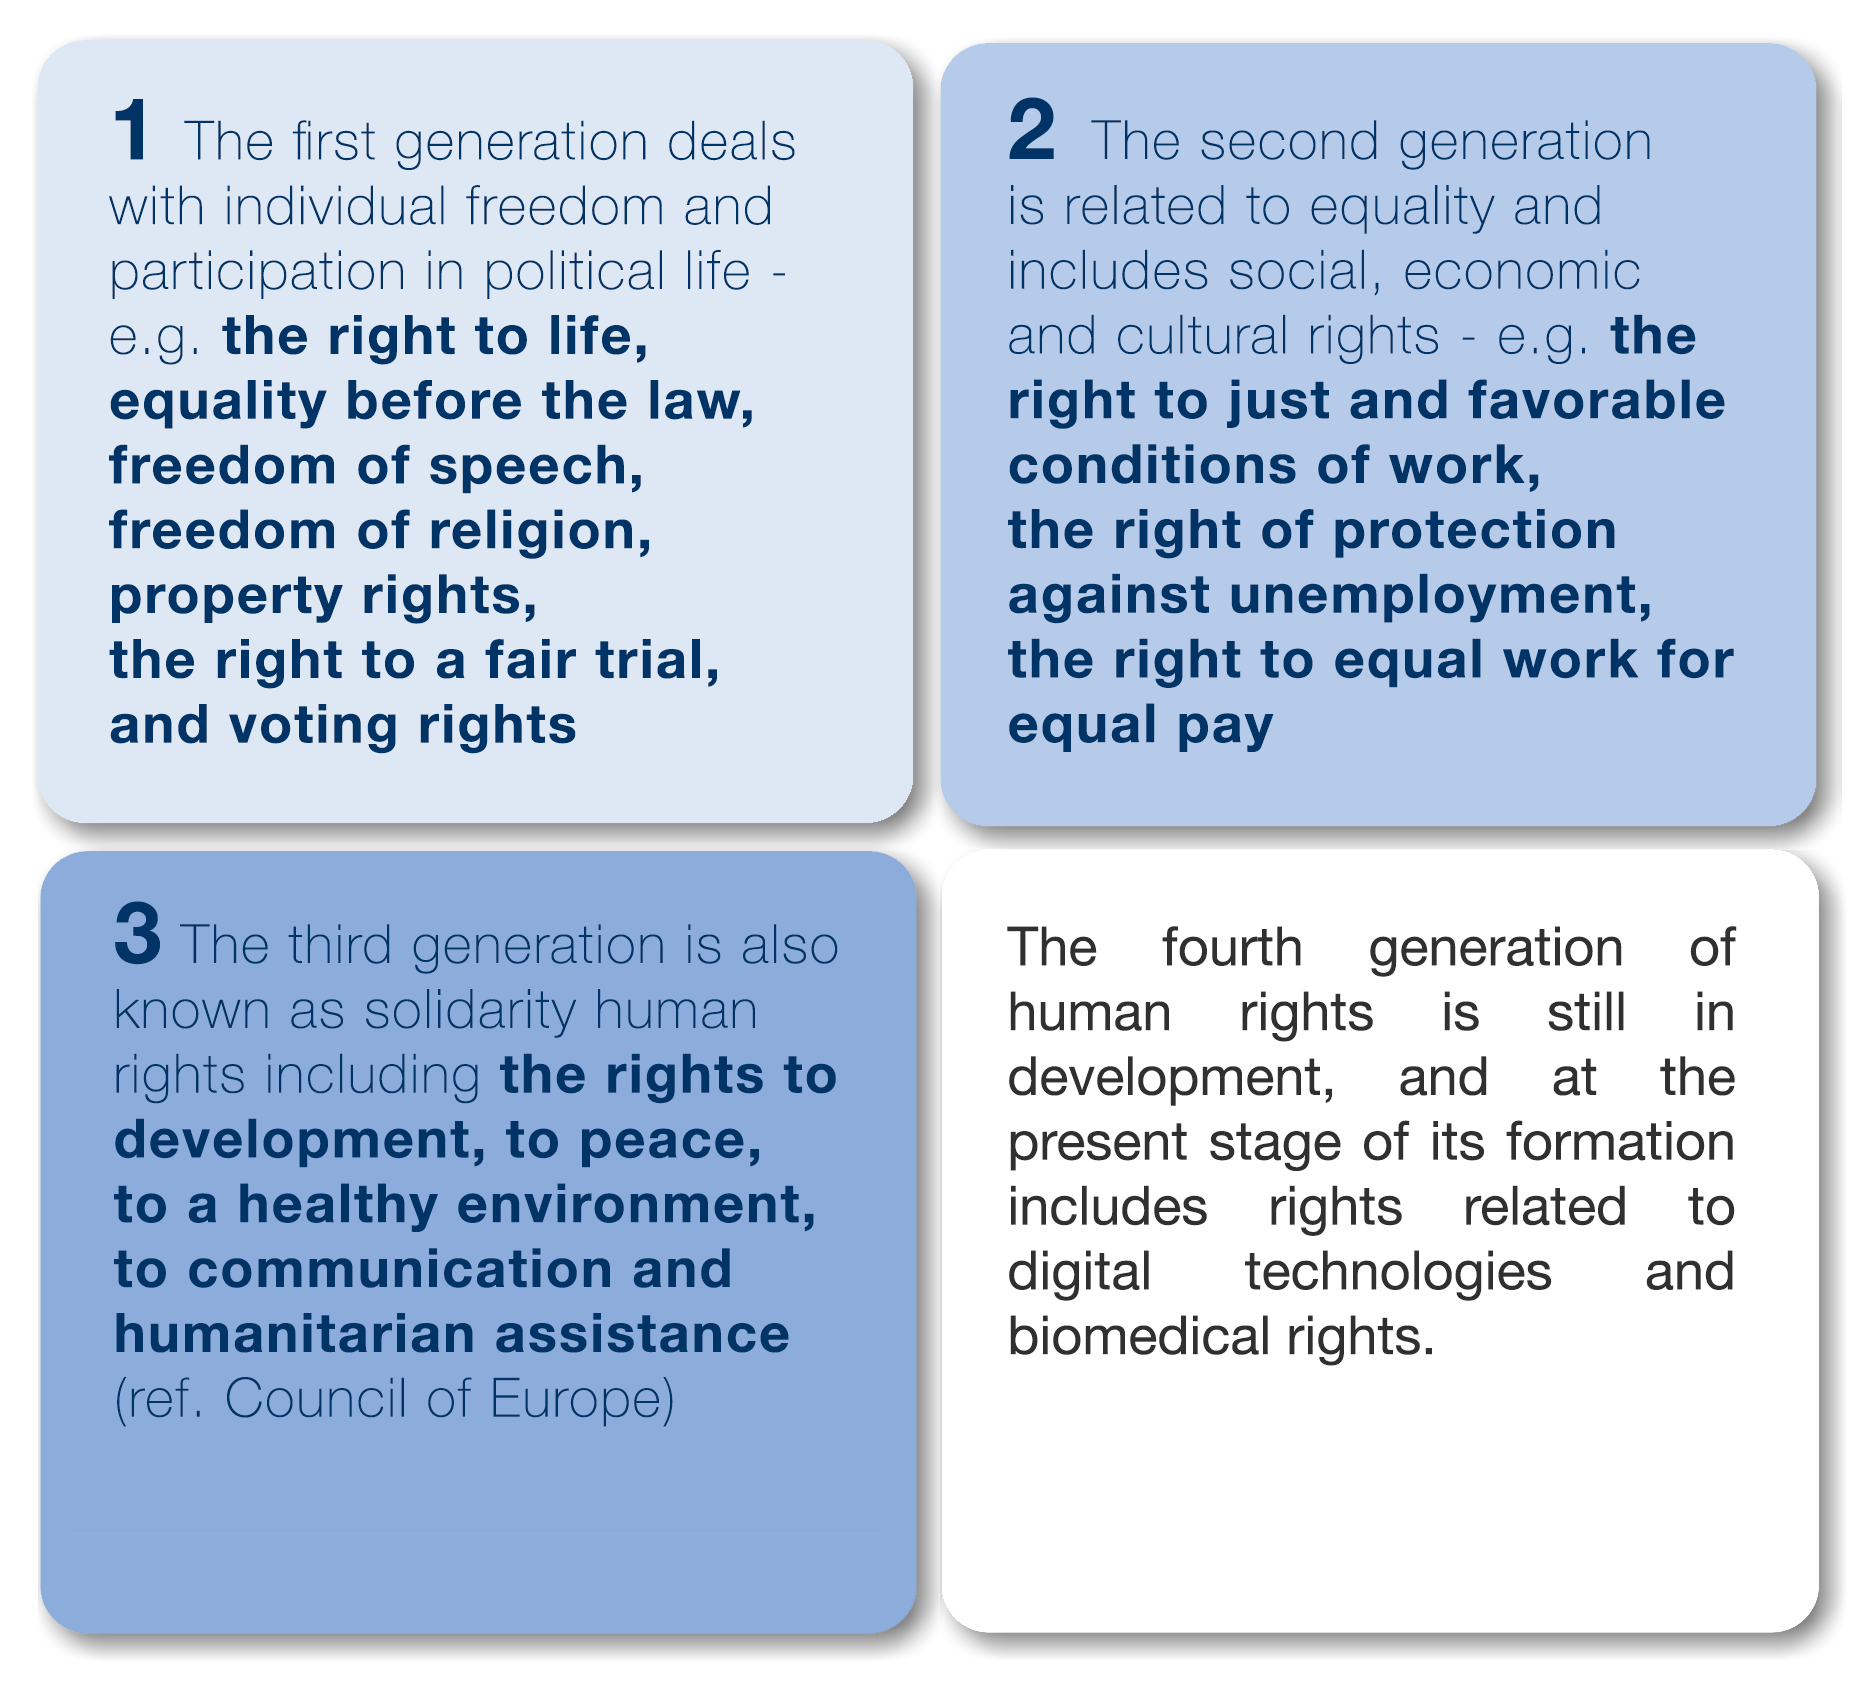 1 The first generation deals with individual freedom and participation in political life - e.g. the right to life, equality before the law, freedom of speech, freedom of religion, property rights, the right to a fair trial, and voting rights. 2 The second generation is related to equality and includes social, economic and cultural rights - e.g. the right to just and favorable conditions of work the right of protection against unemployment, the right to equal work for equal pay. 3 The third generation is also known as solidarity human rights including the rights to development, to peace, to a healthy environment, to communication and humanitarian assistance (ref. Council of Europe). Fourth generation of human rights is still in development, and at the present stage of its formation includes rights related to digital technologies and biomedical rights. 